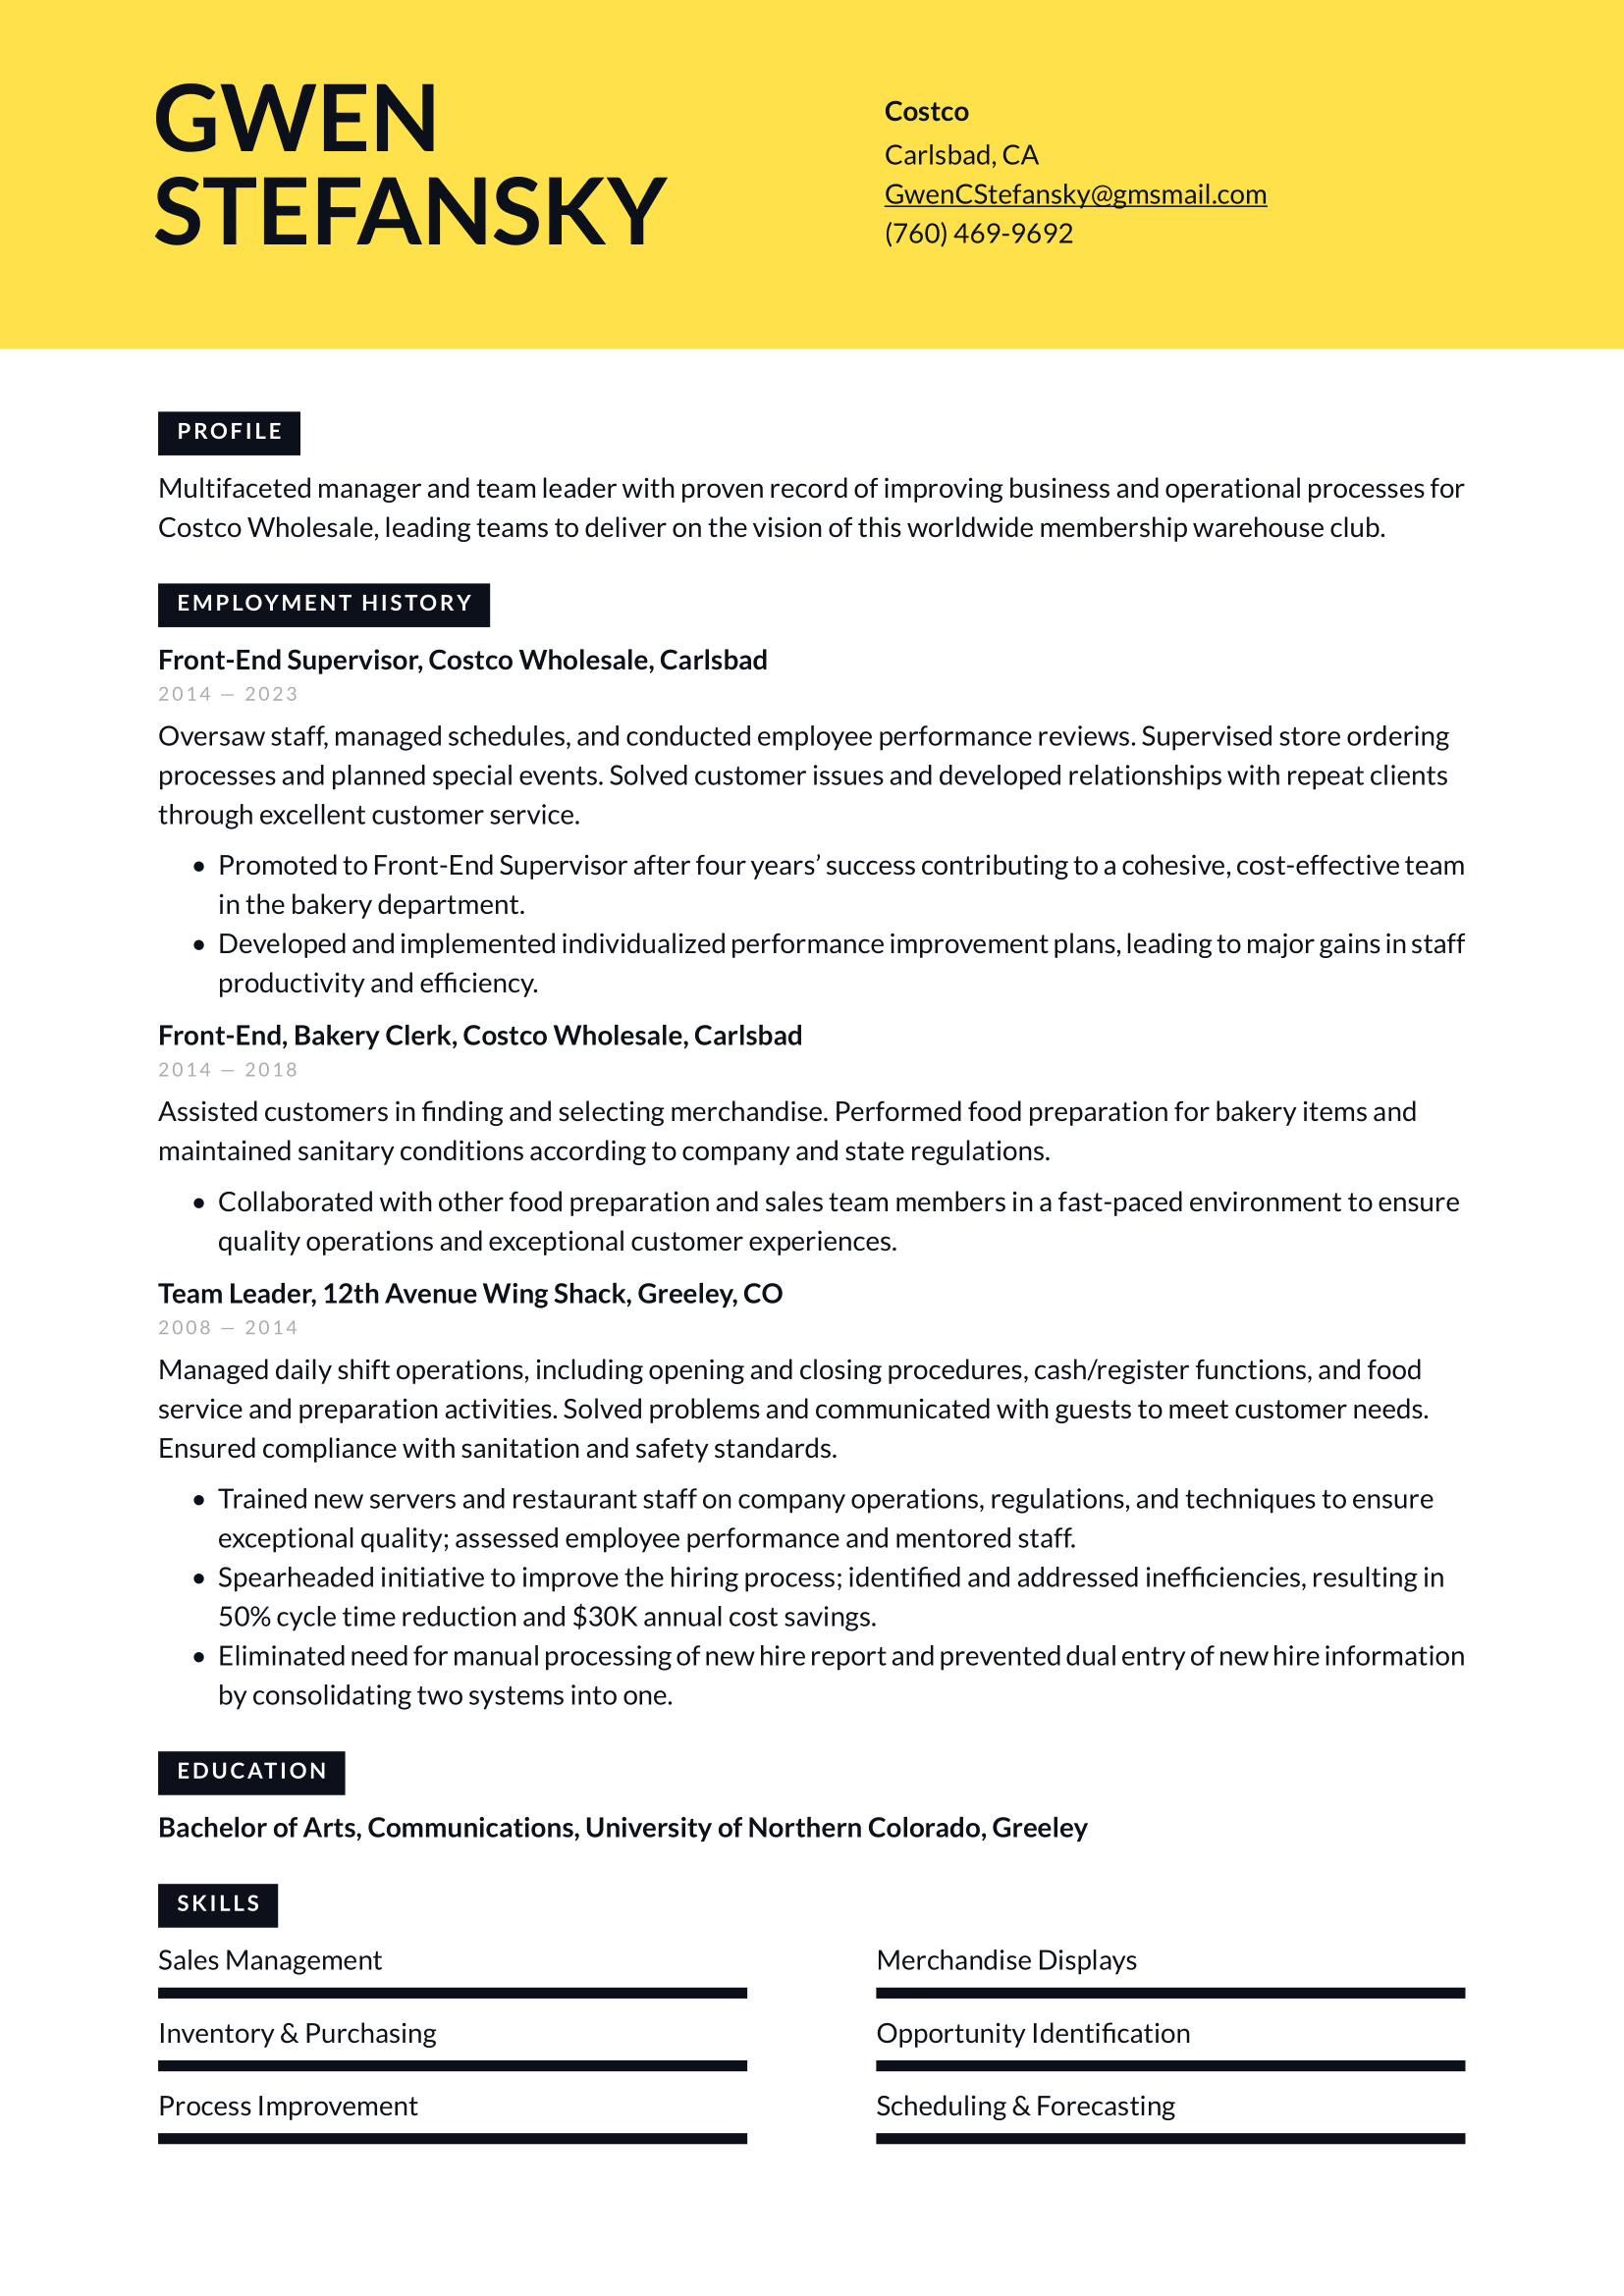 Costco Resume Example & Writing Guide